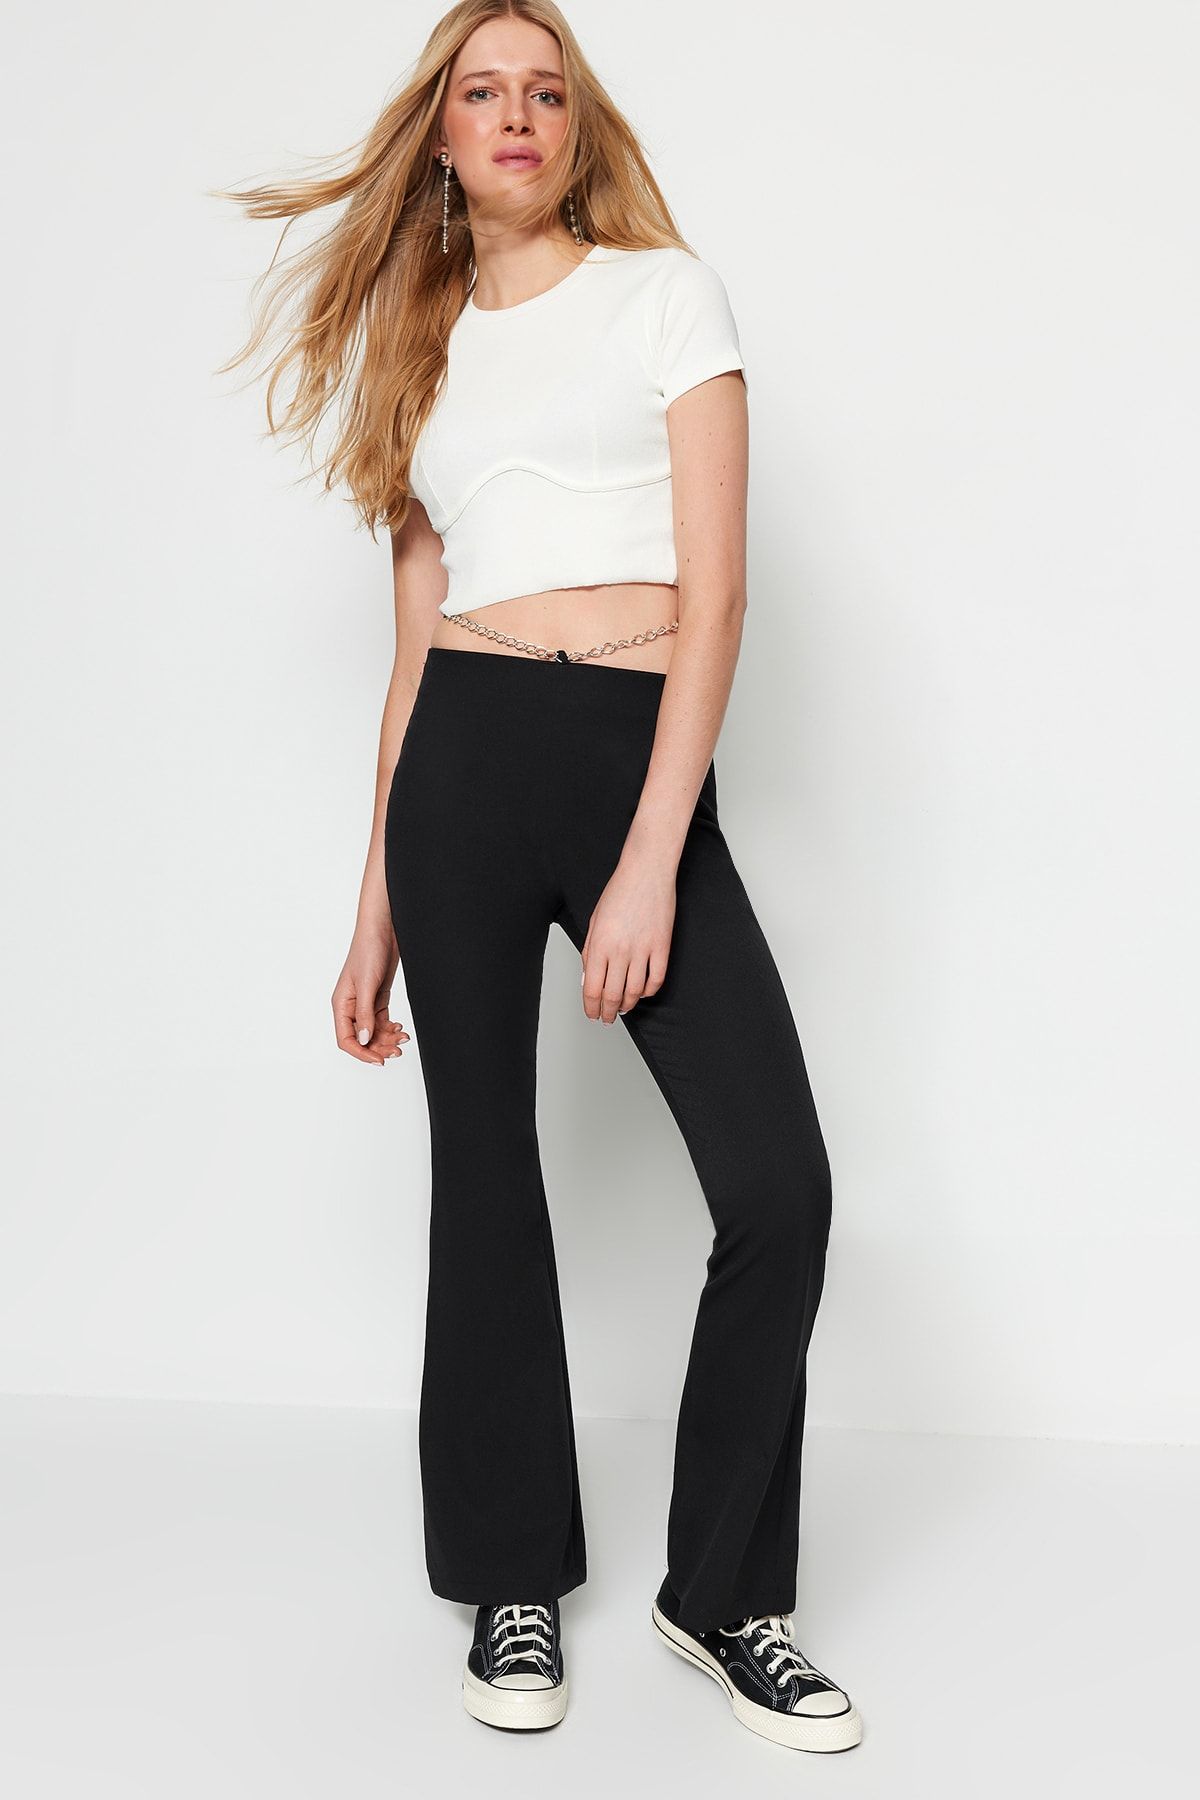 Topshop flared ribbed pants in black